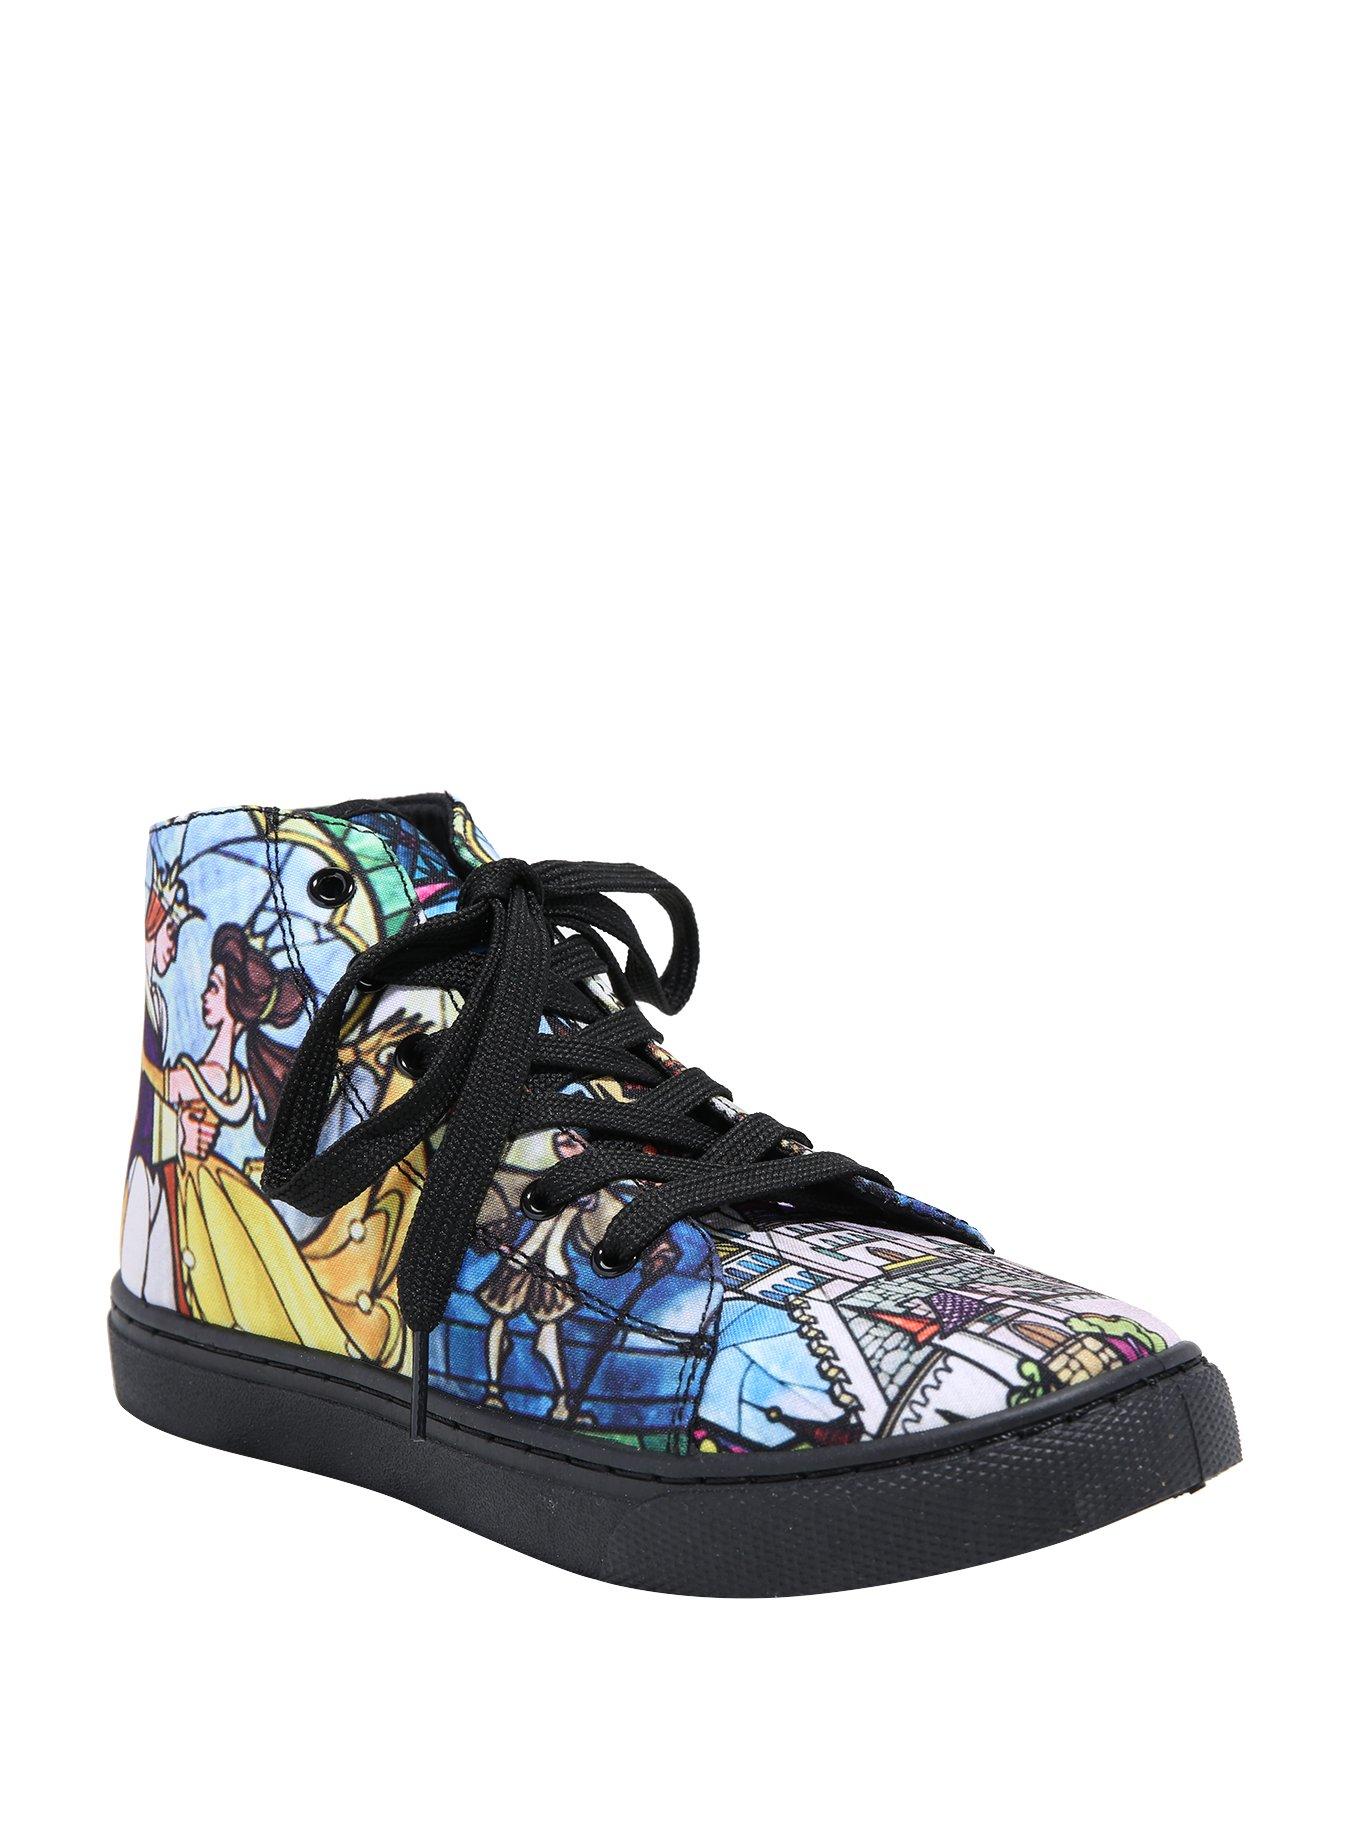 Disney Beauty And The Beast Stained Glass Hi-Top Sneakers, MULTI, hi-res